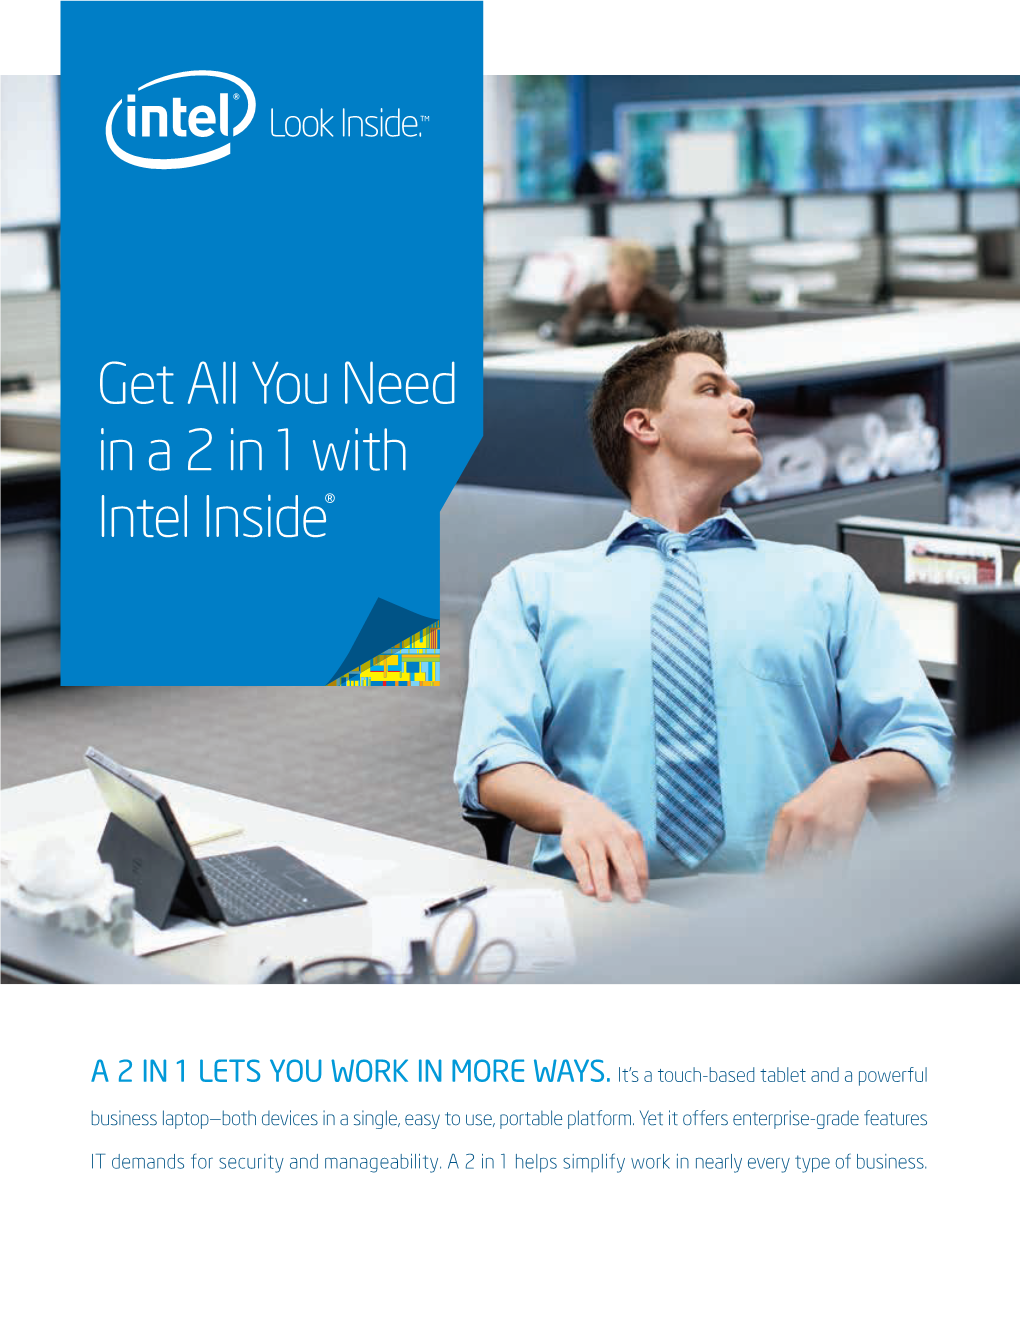 Get All You Need in a 2 in 1 with Intel Inside®